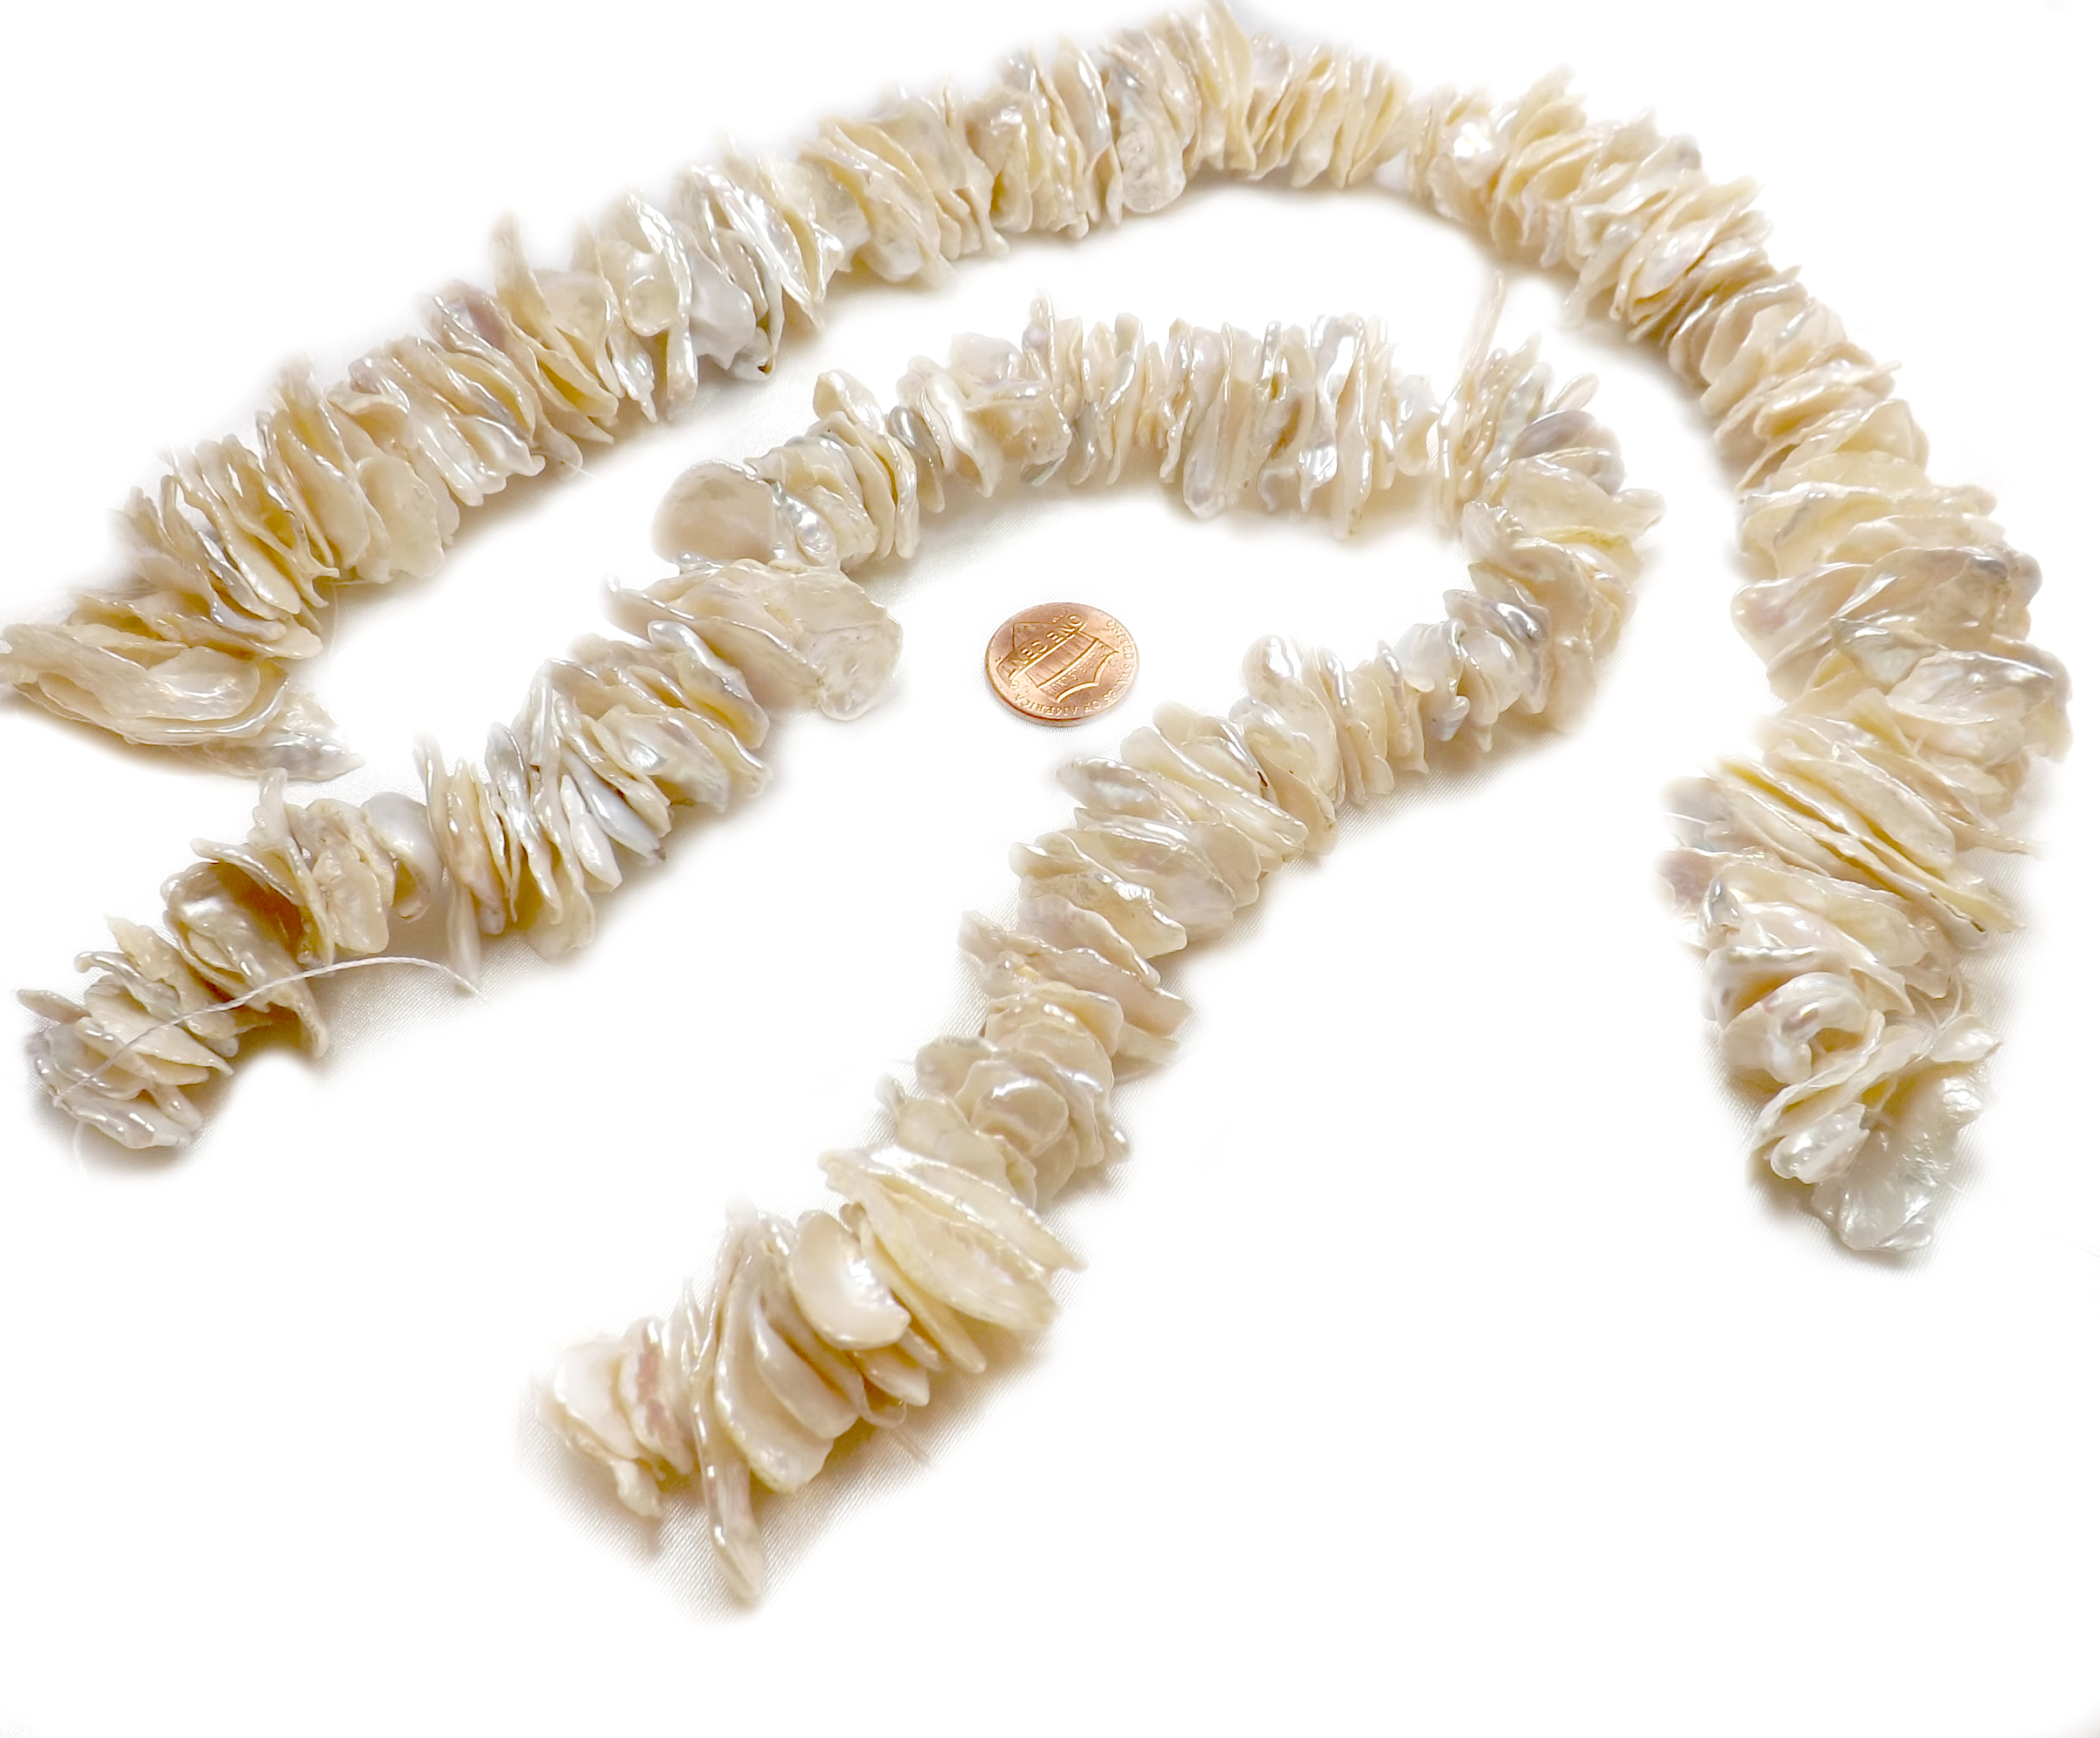 Center Drilled 20x25mm Huge Sized Rare 130 Cream White Colored Thin Keshi  Pearls on a Strand